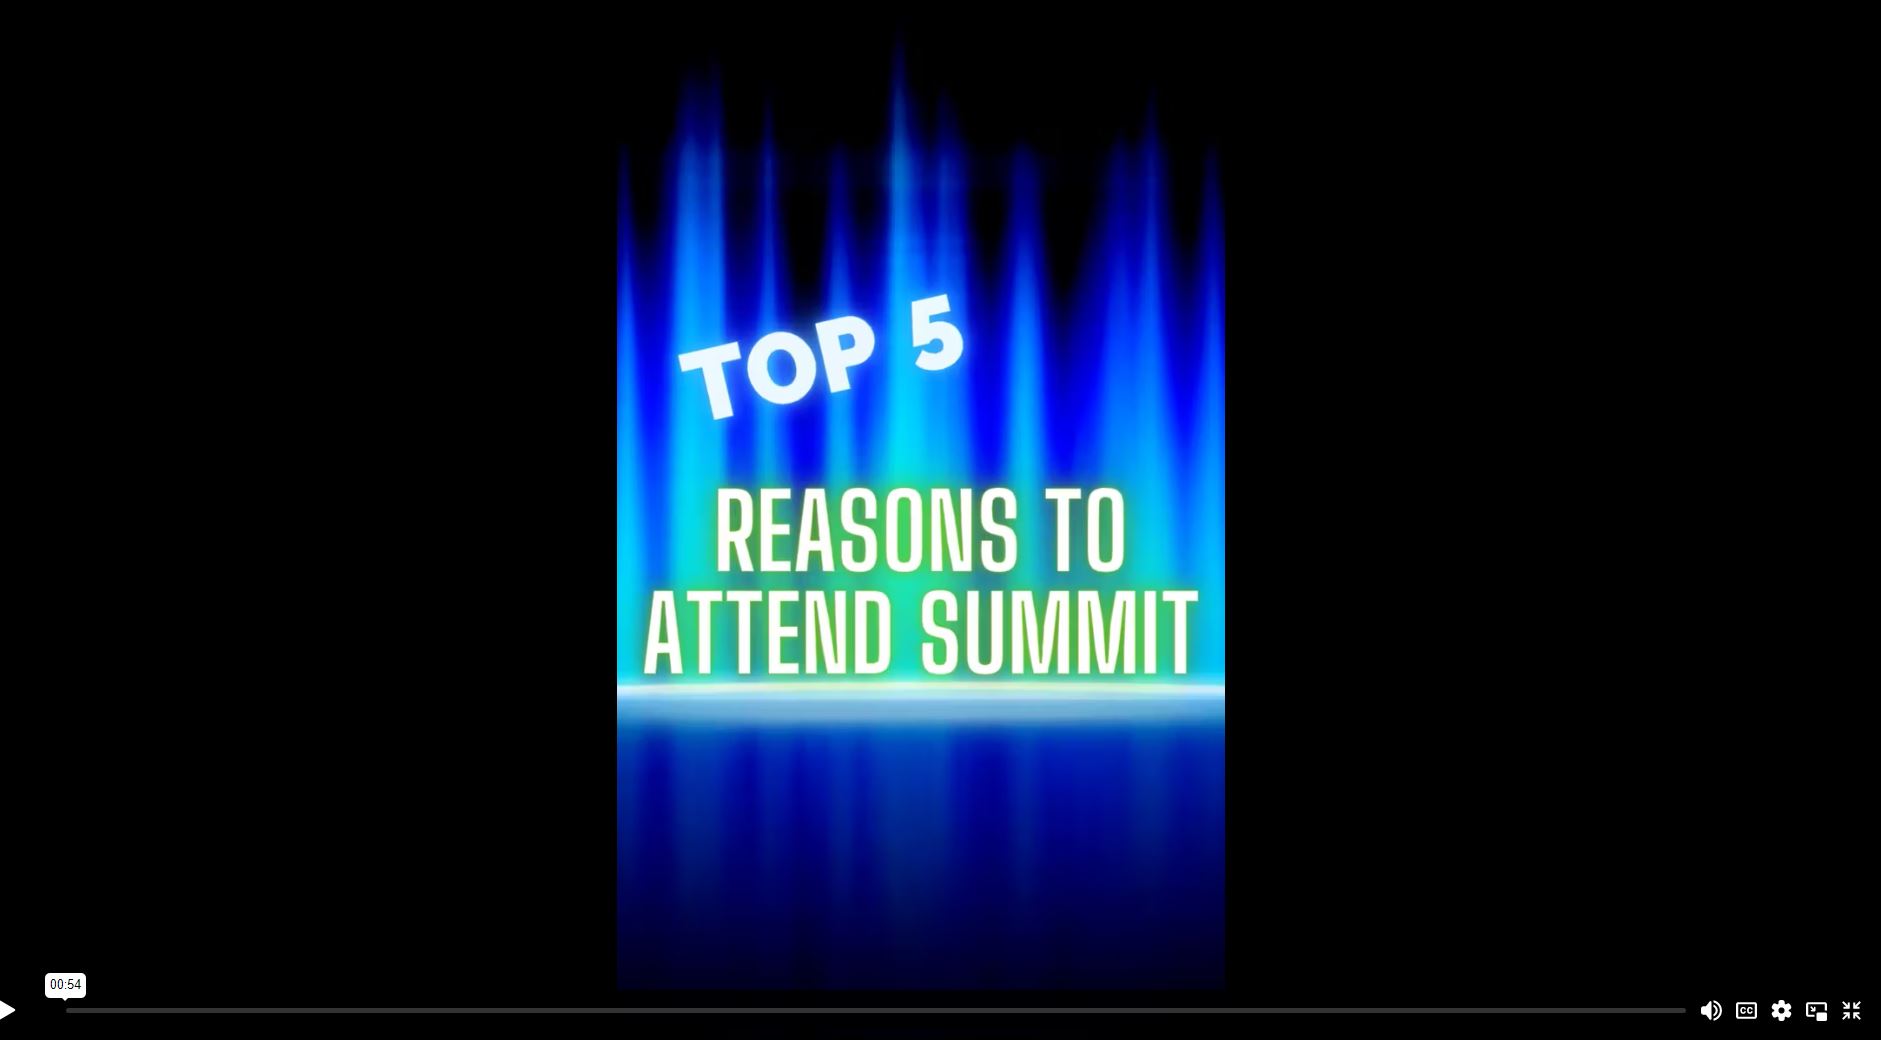 Top 5 Reasons to Attend Summit